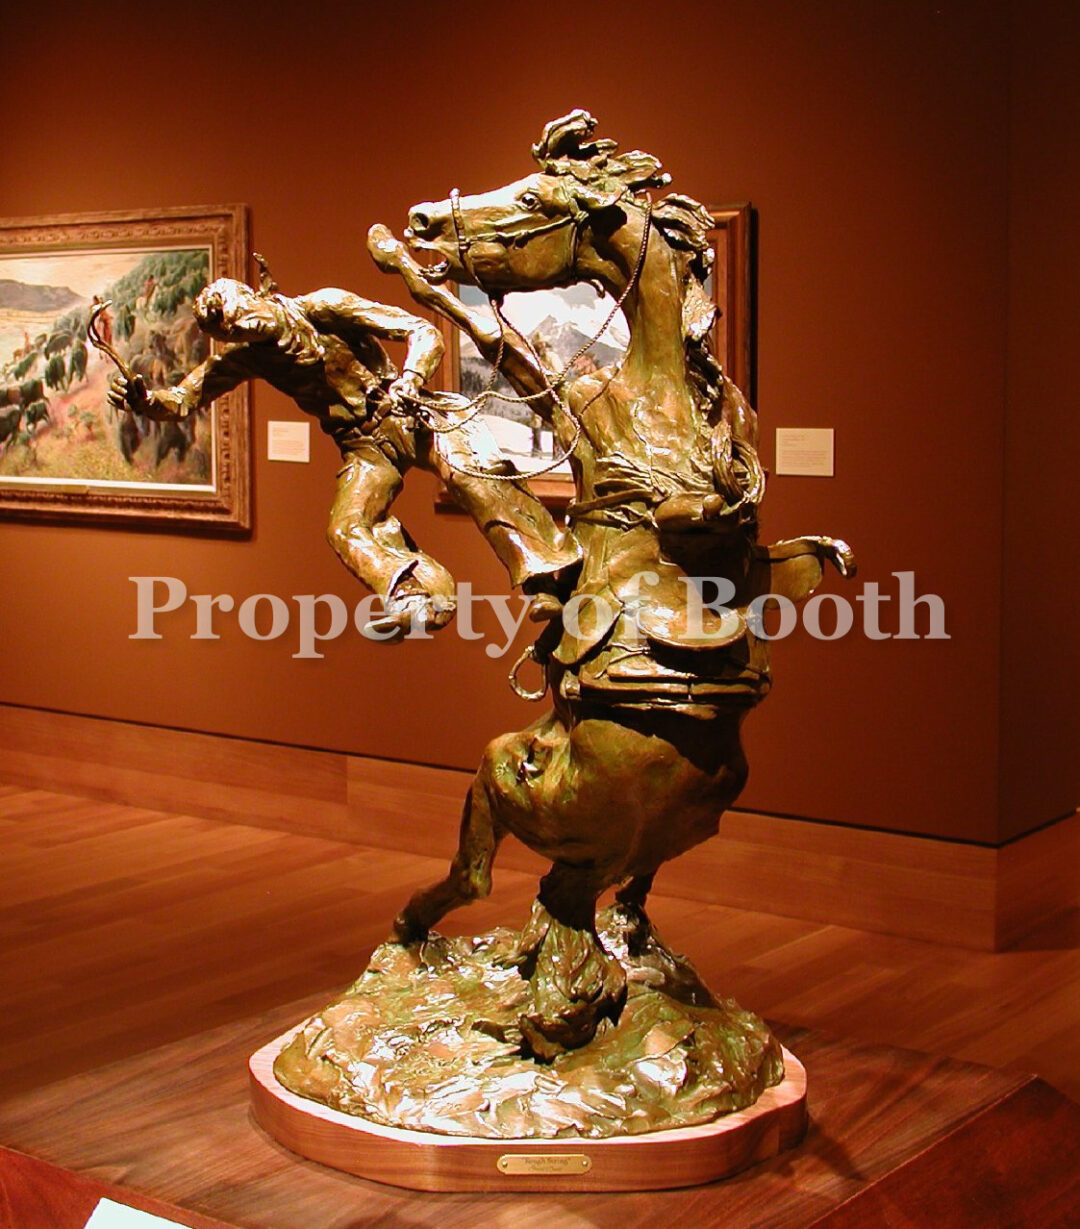 © Ulysses Grant Speed, The Rough String, n.d., bronze, 34.25 x 25 x 18″